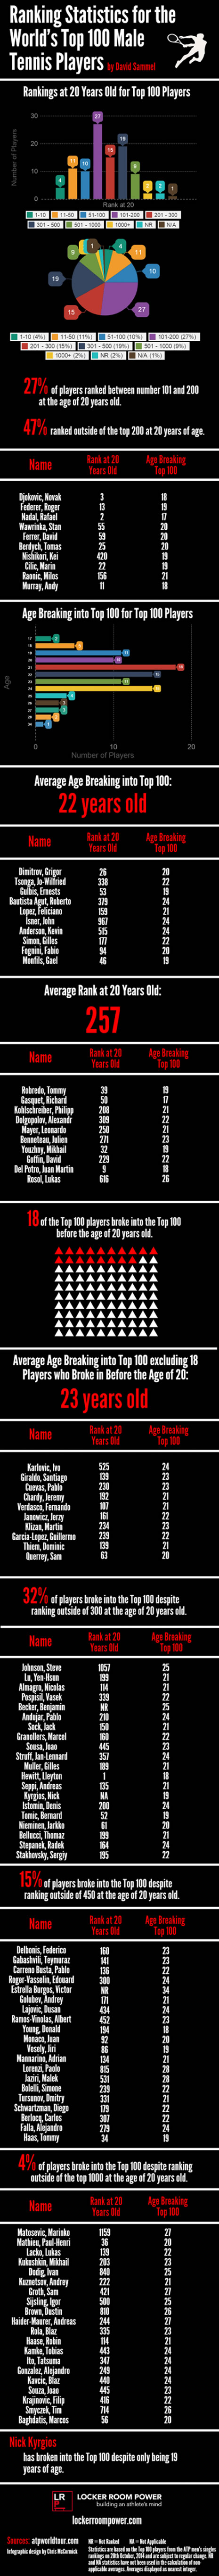 infographic-top100